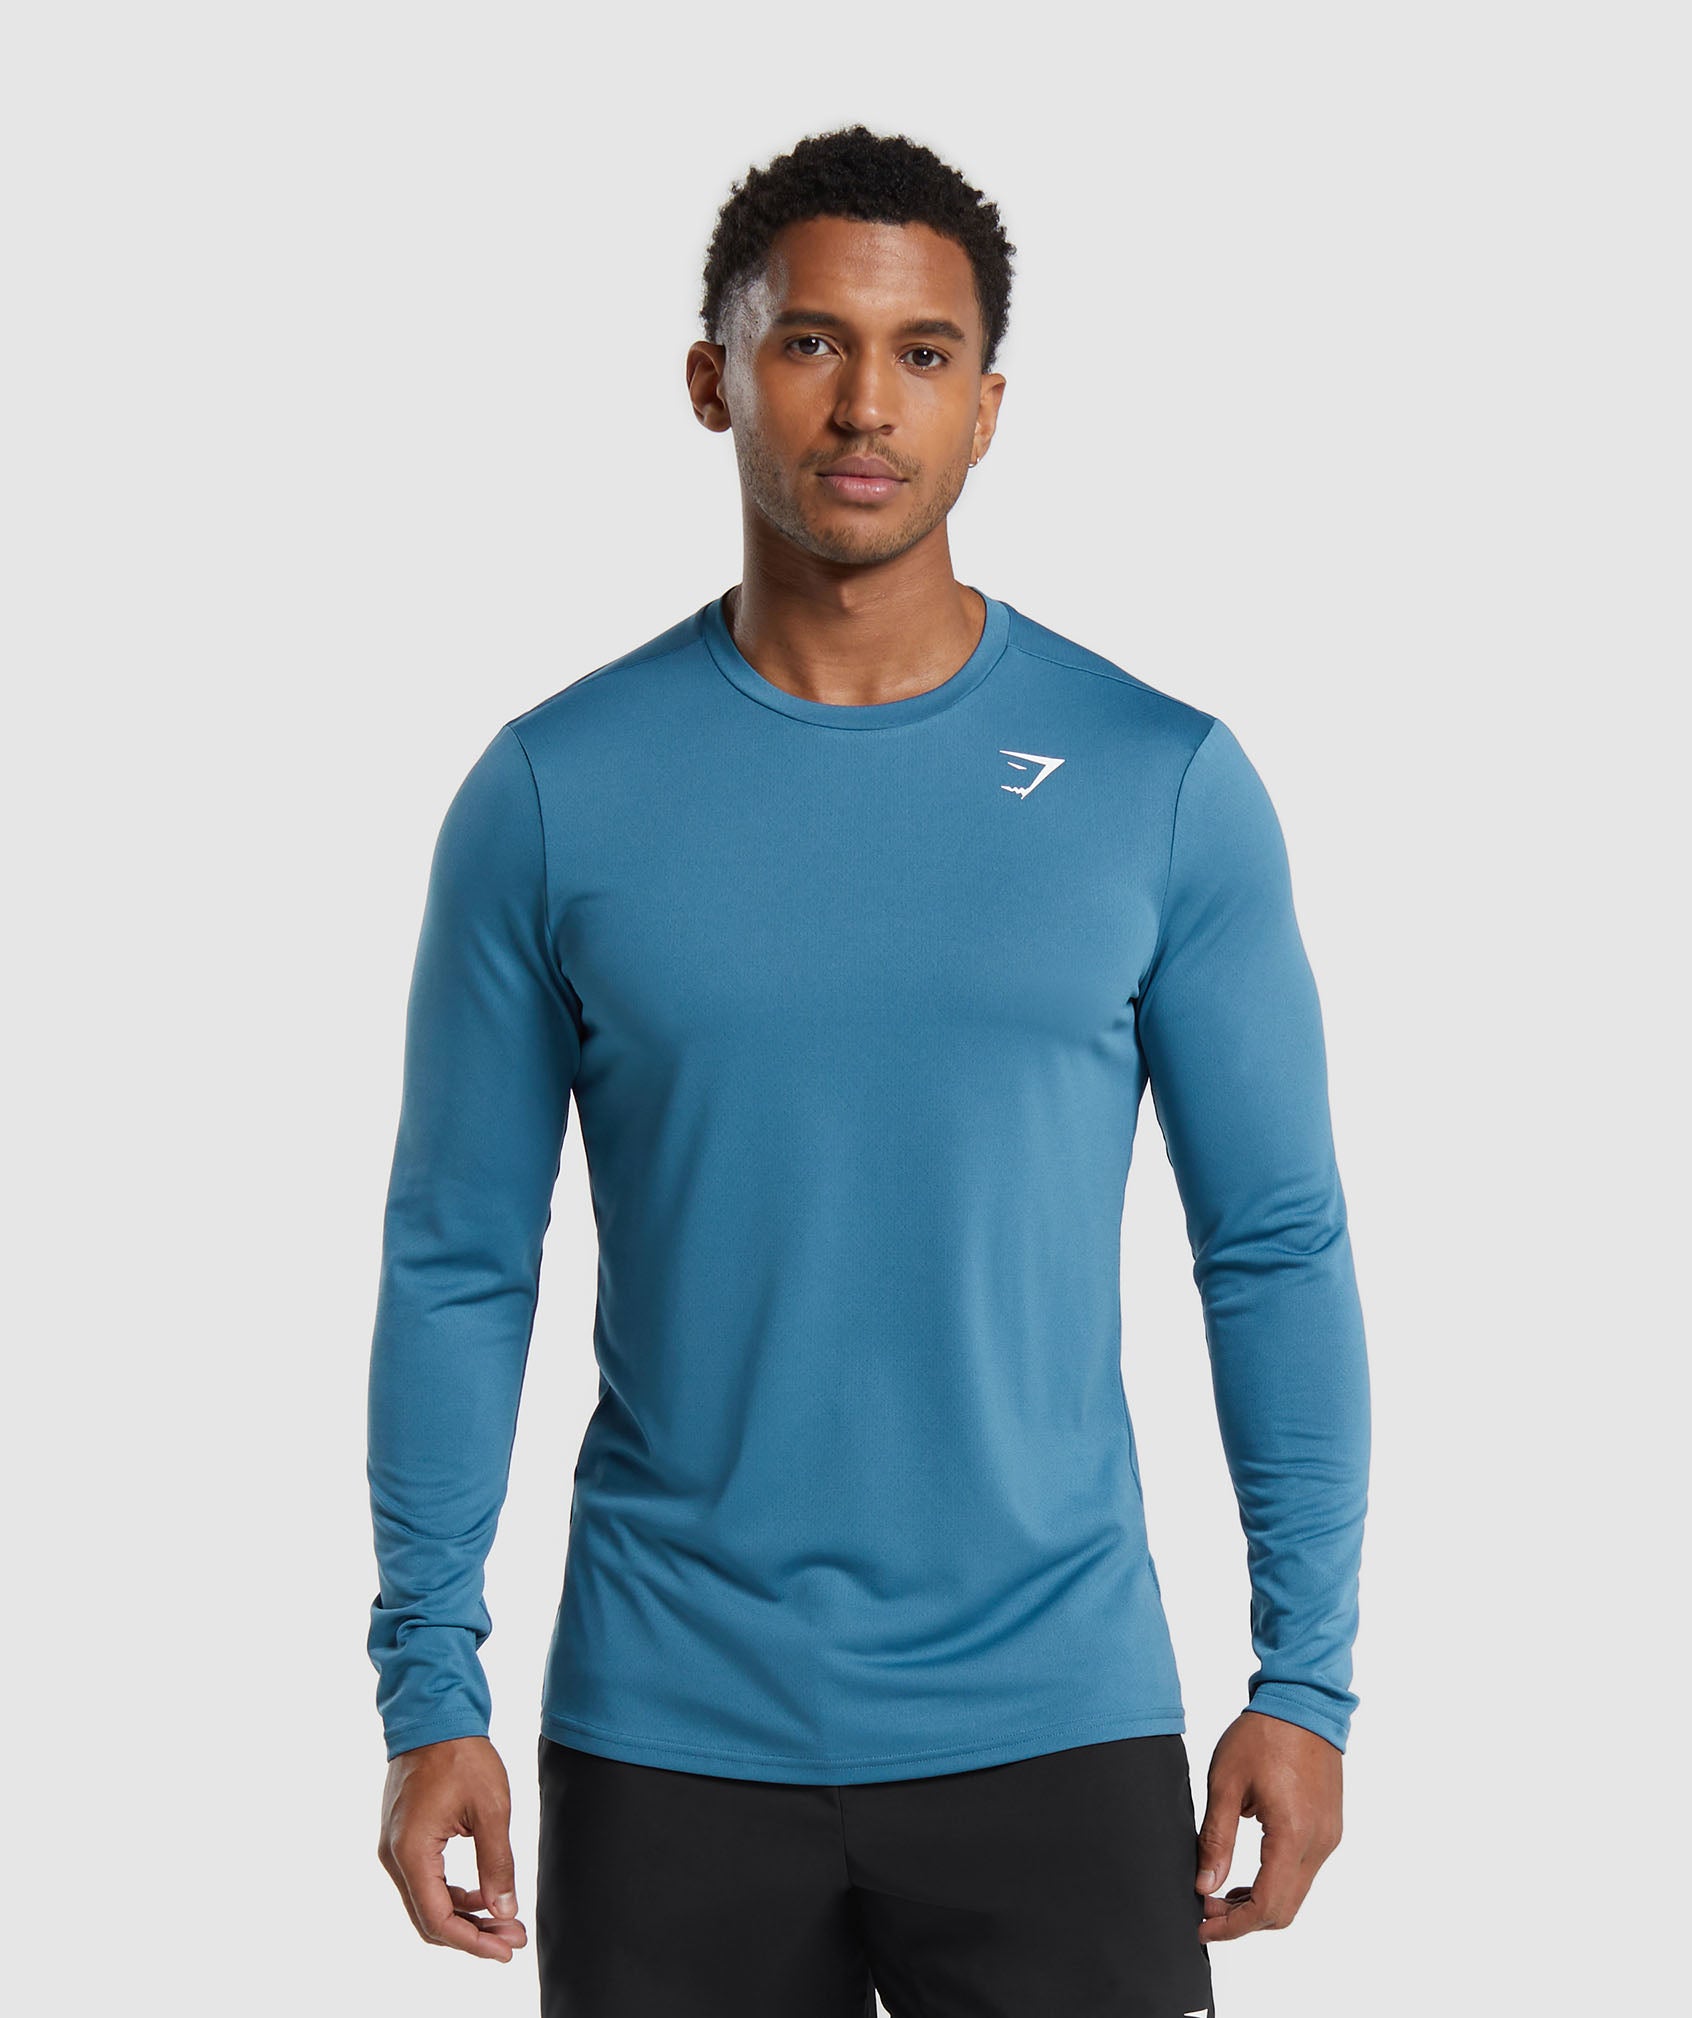 Arrival Long Sleeve T-Shirt in Utility Blue